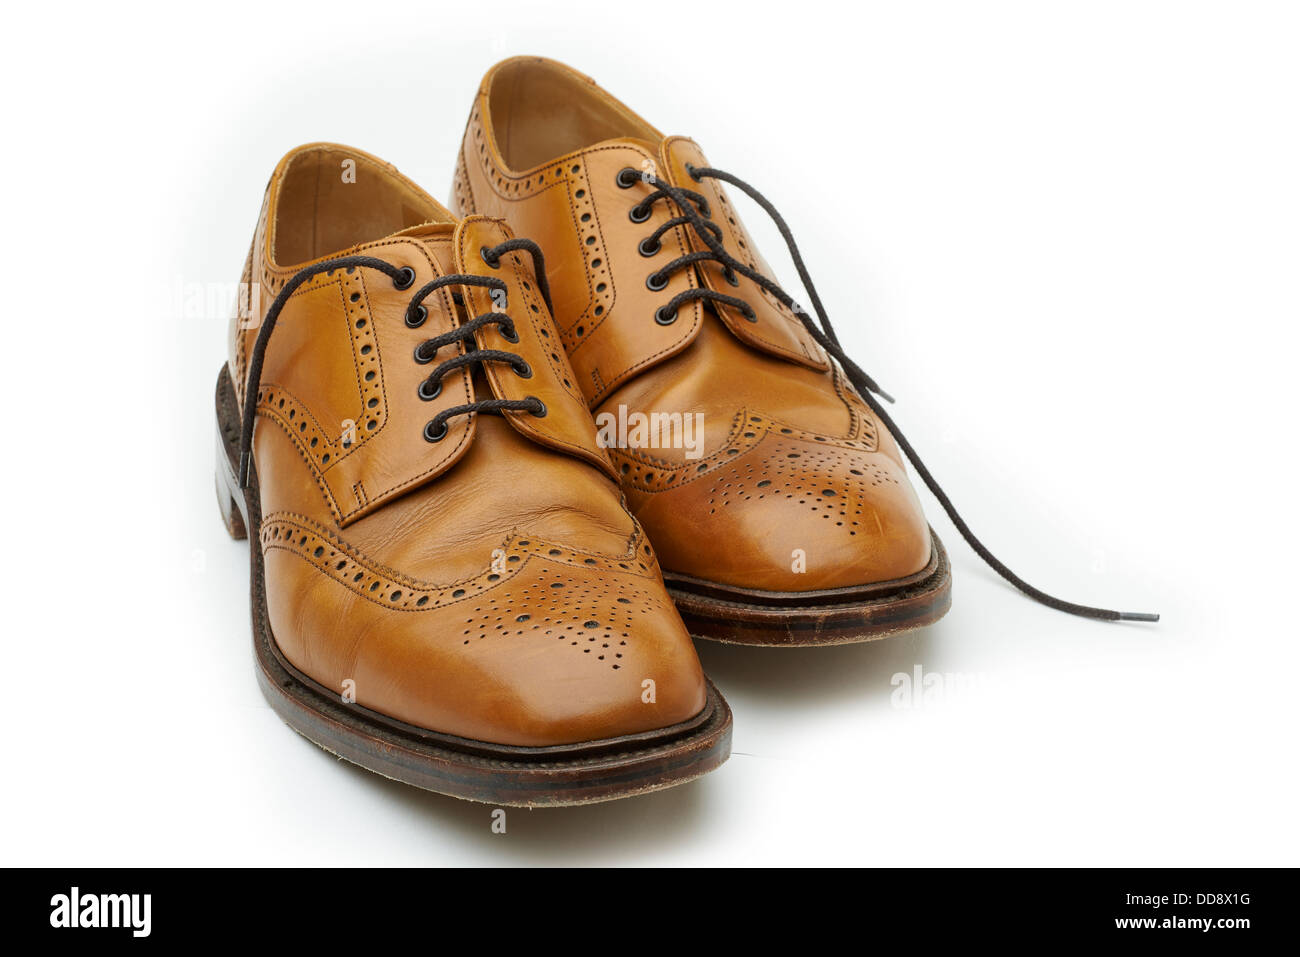 Loake shoes Brogues tan Classic english shoe style best quality leather  history 1880 old design cut out studio Stock Photo - Alamy